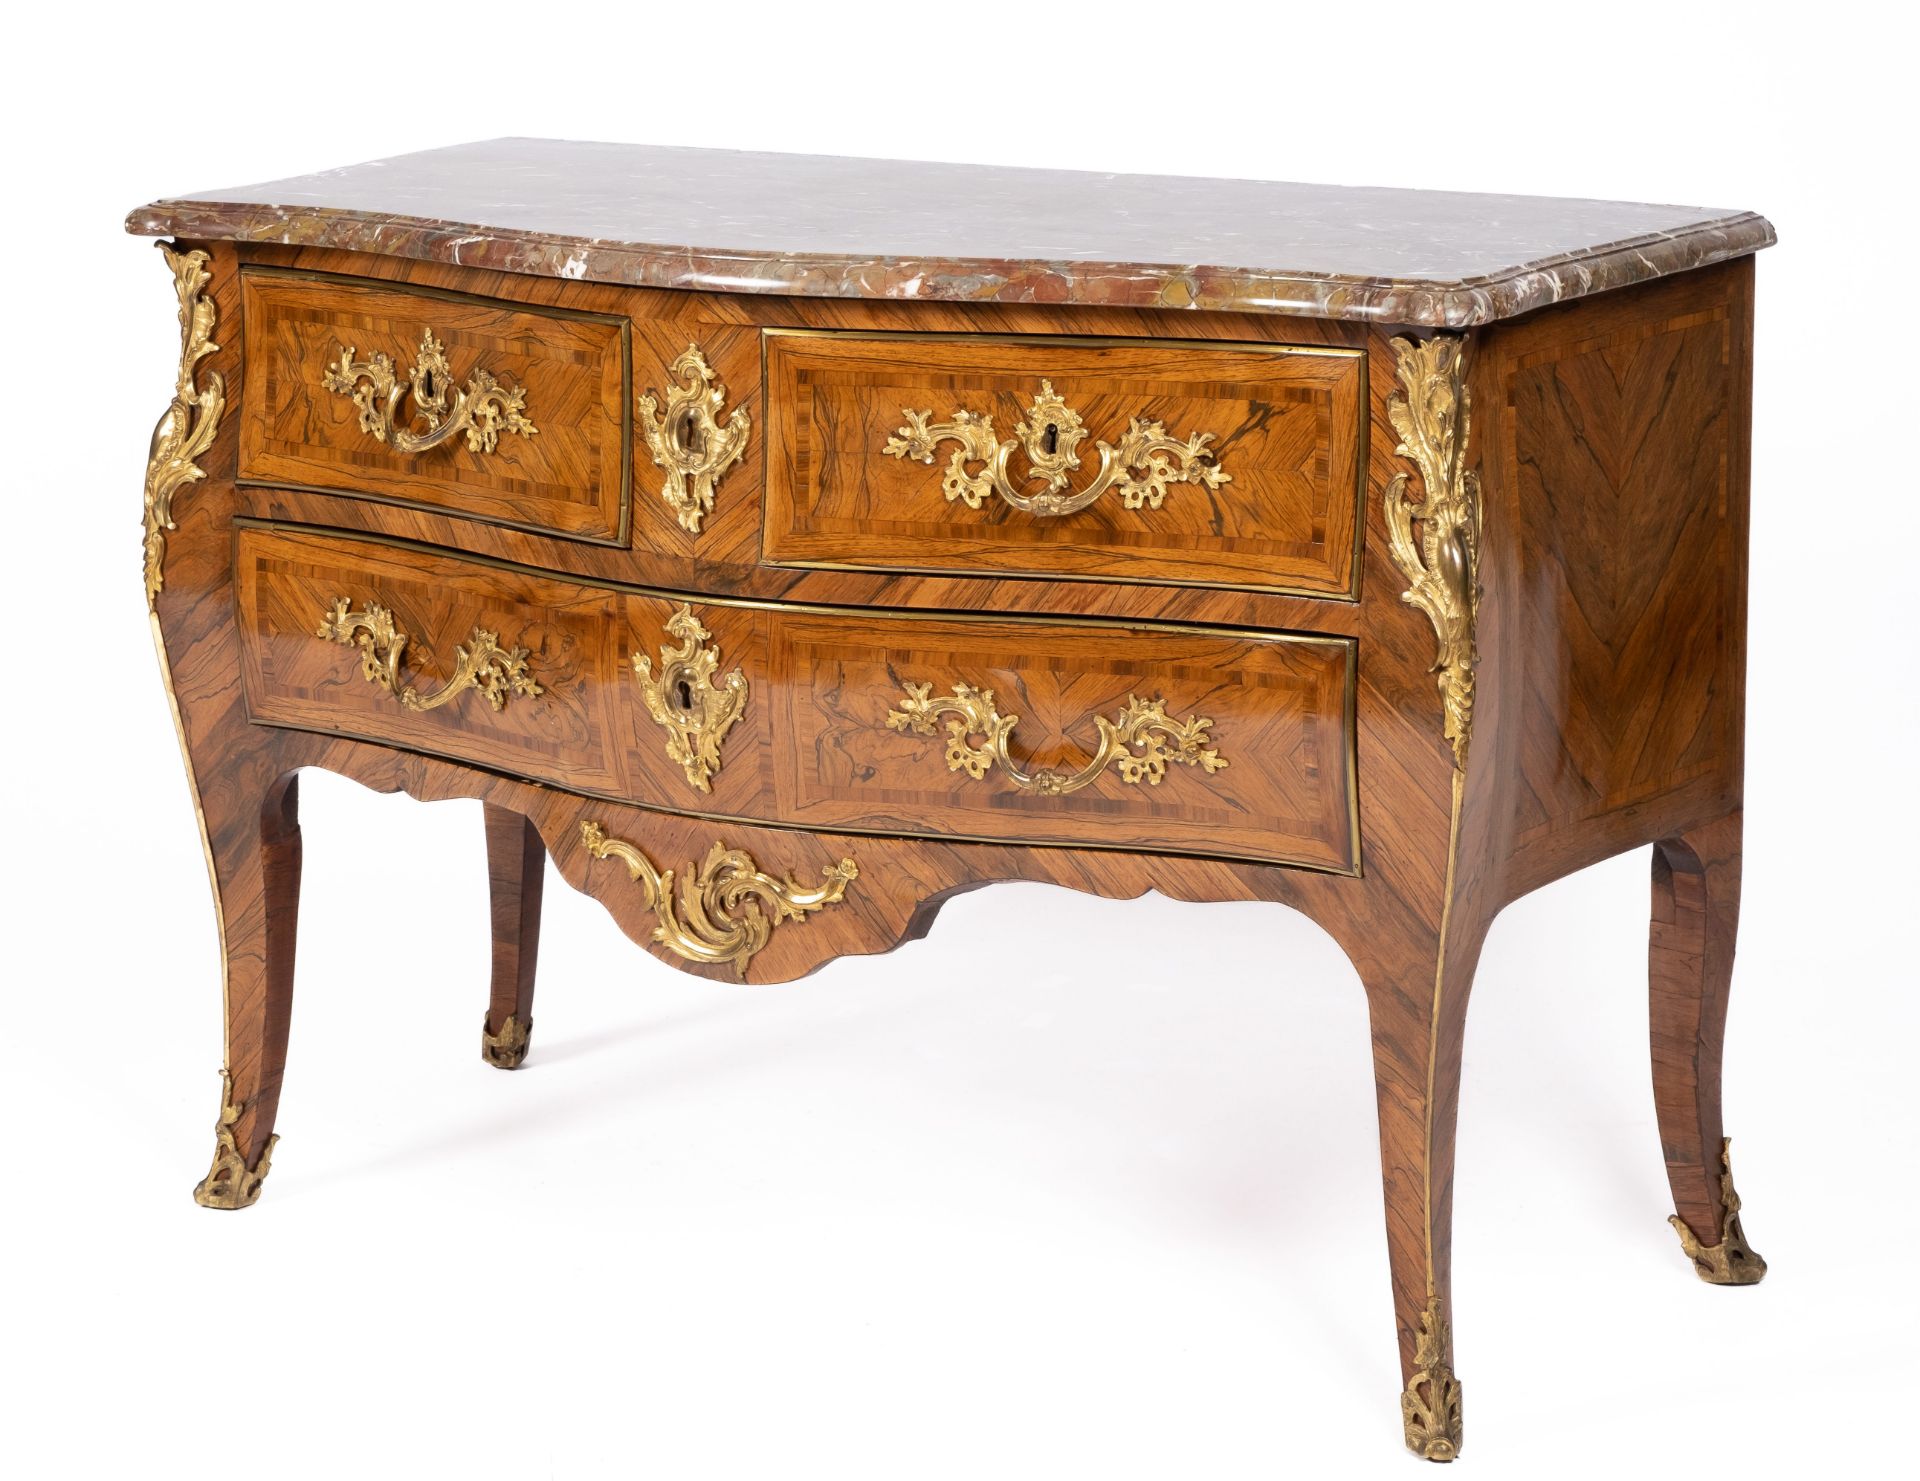 A Louis XV ormolu-mounted kingwood and fruitwood marquetry commode